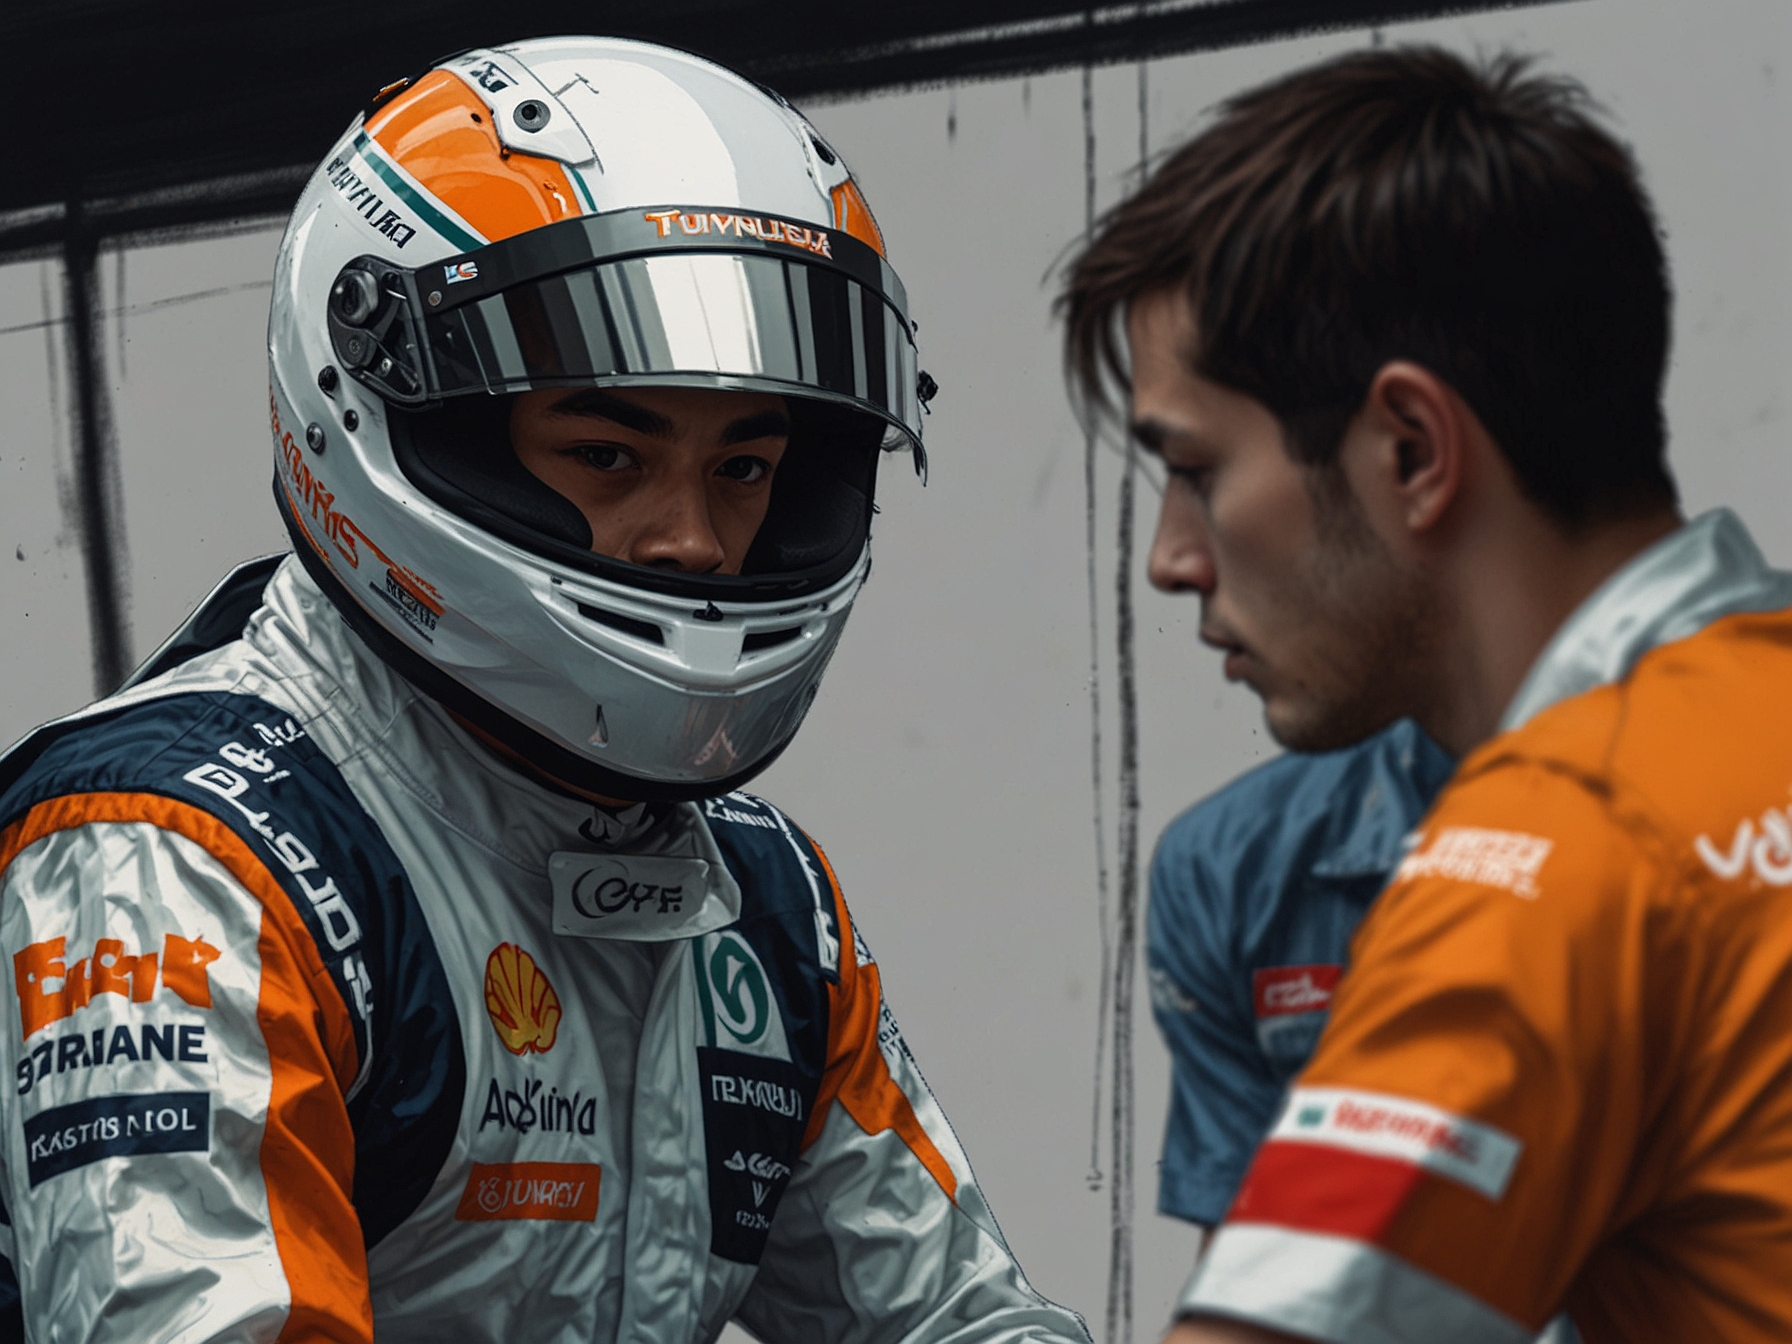 Yuki Tsunoda during the Austrian Grand Prix qualifying session, looking focused and intense as he prepares for his lap, representing the pressures faced by young athletes in high-stake environments.